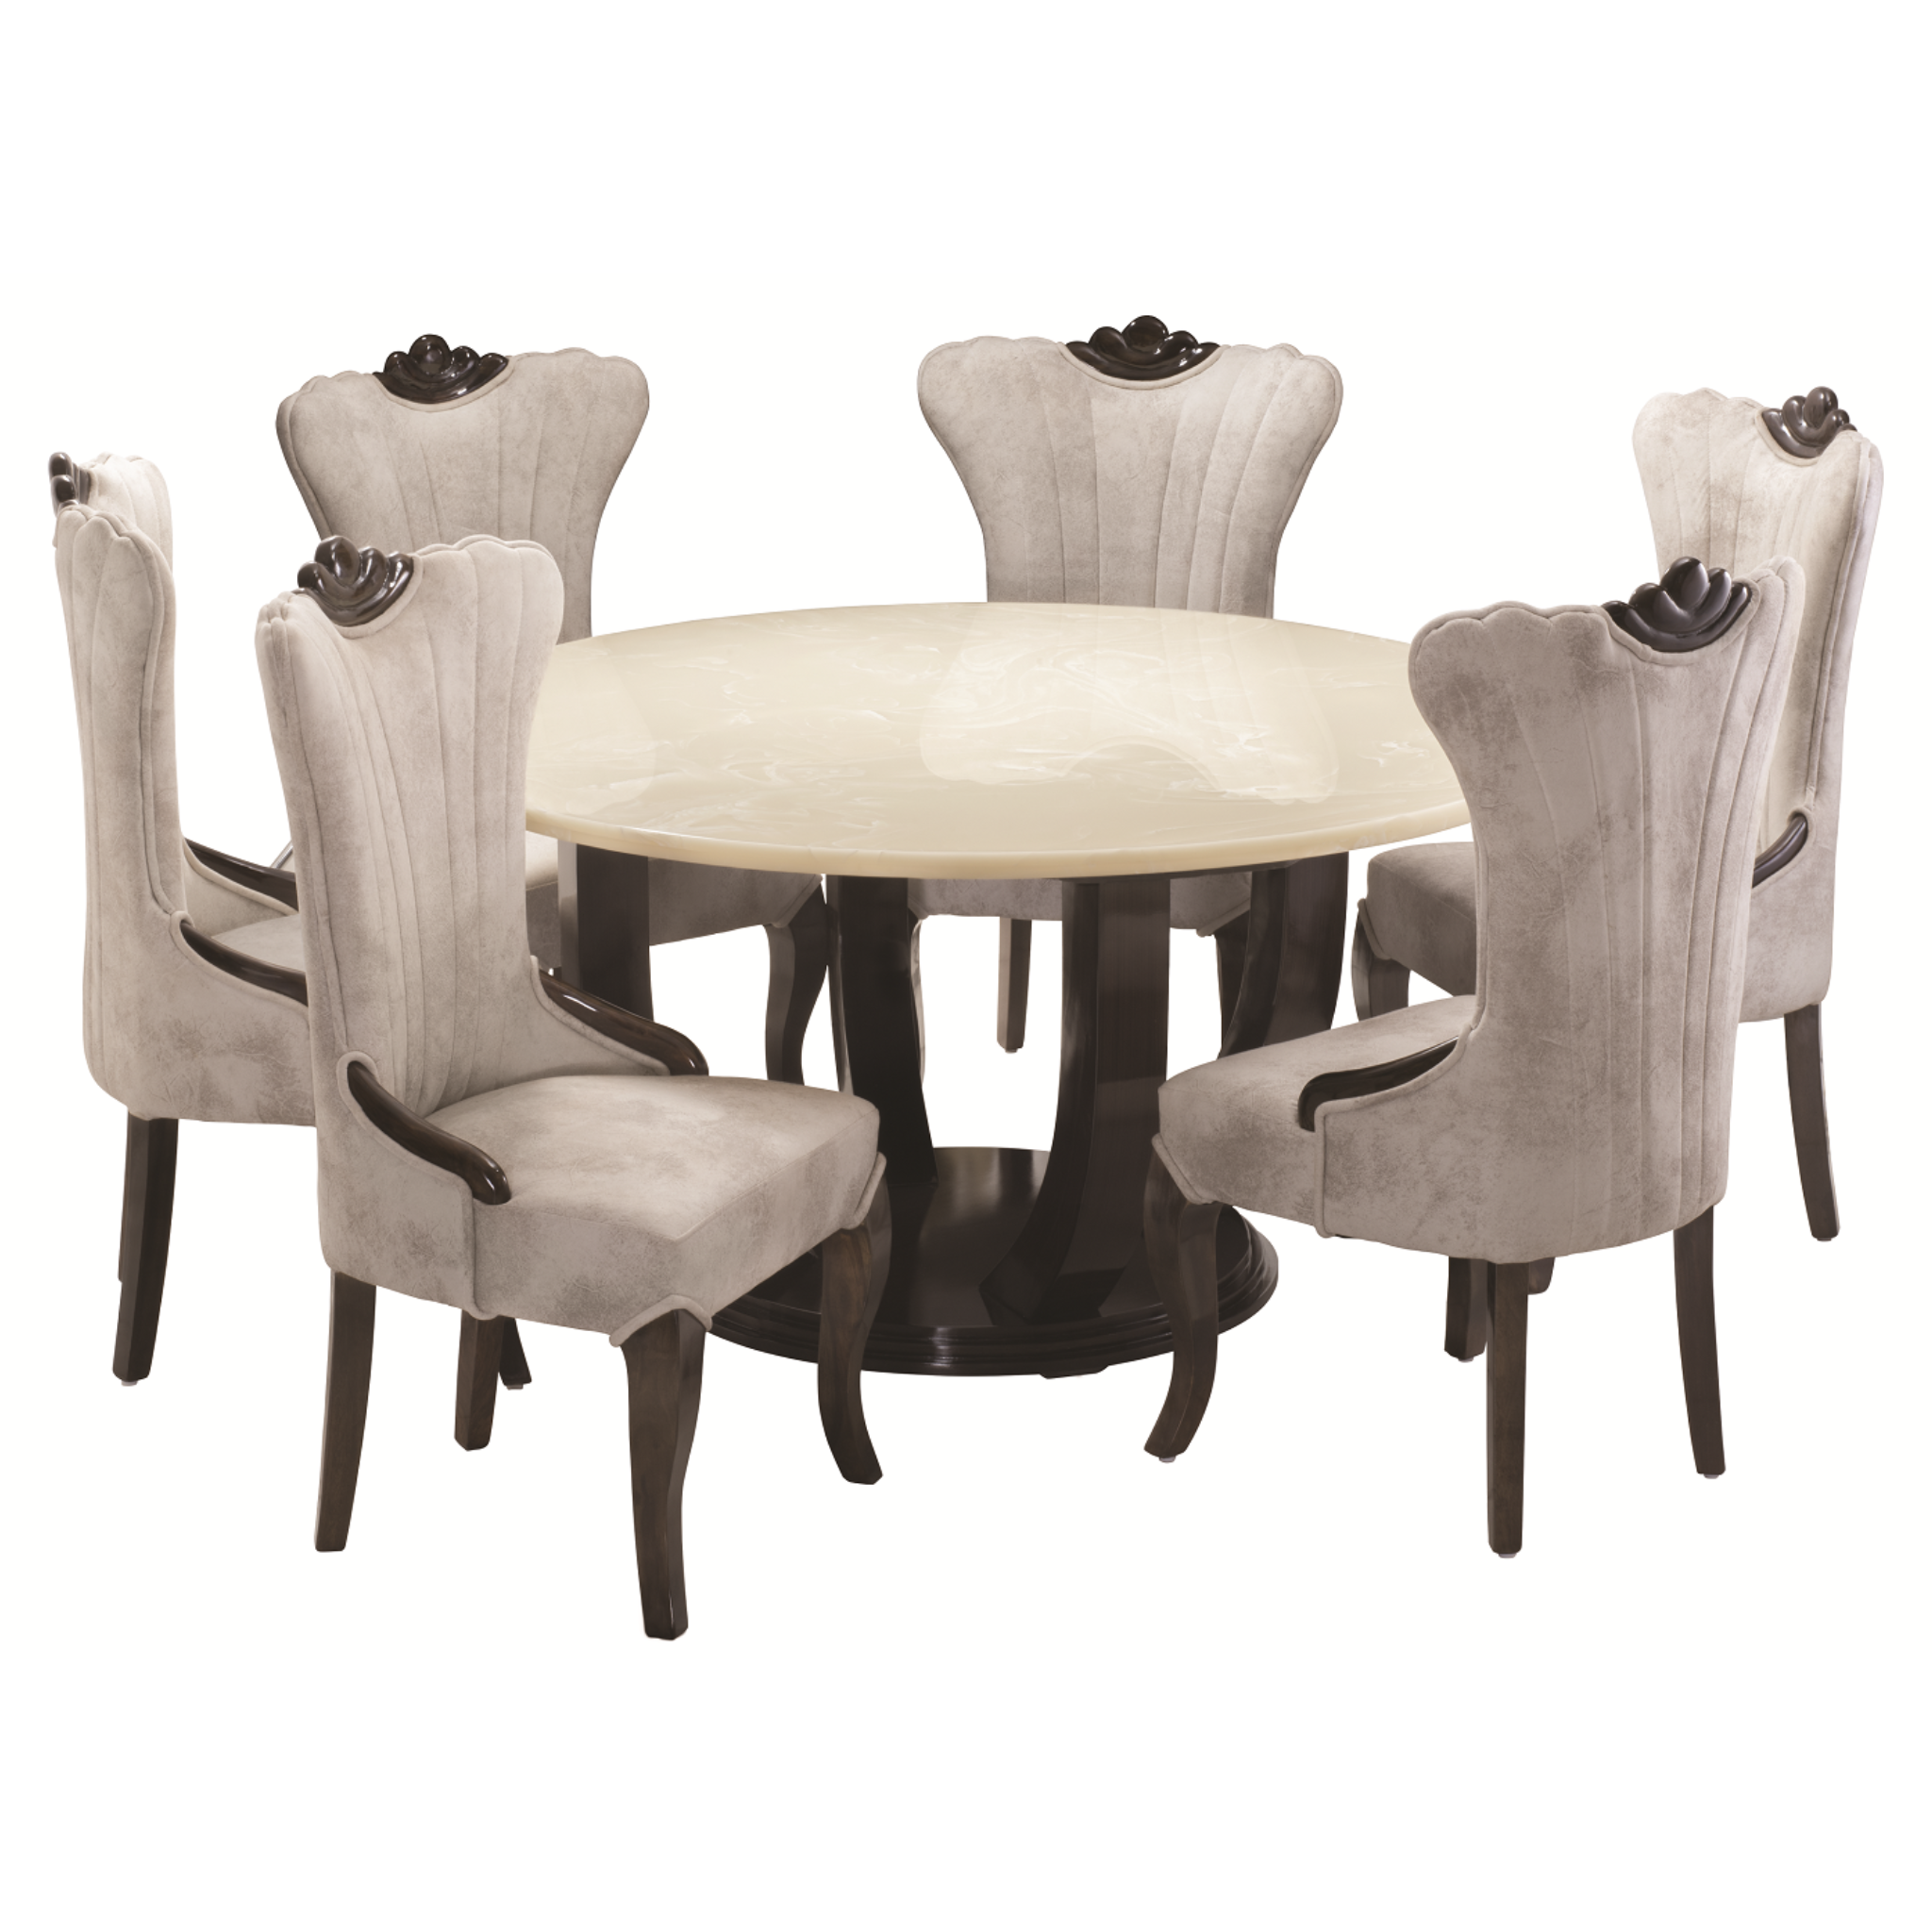 Valentino Round Dining Table with Chair